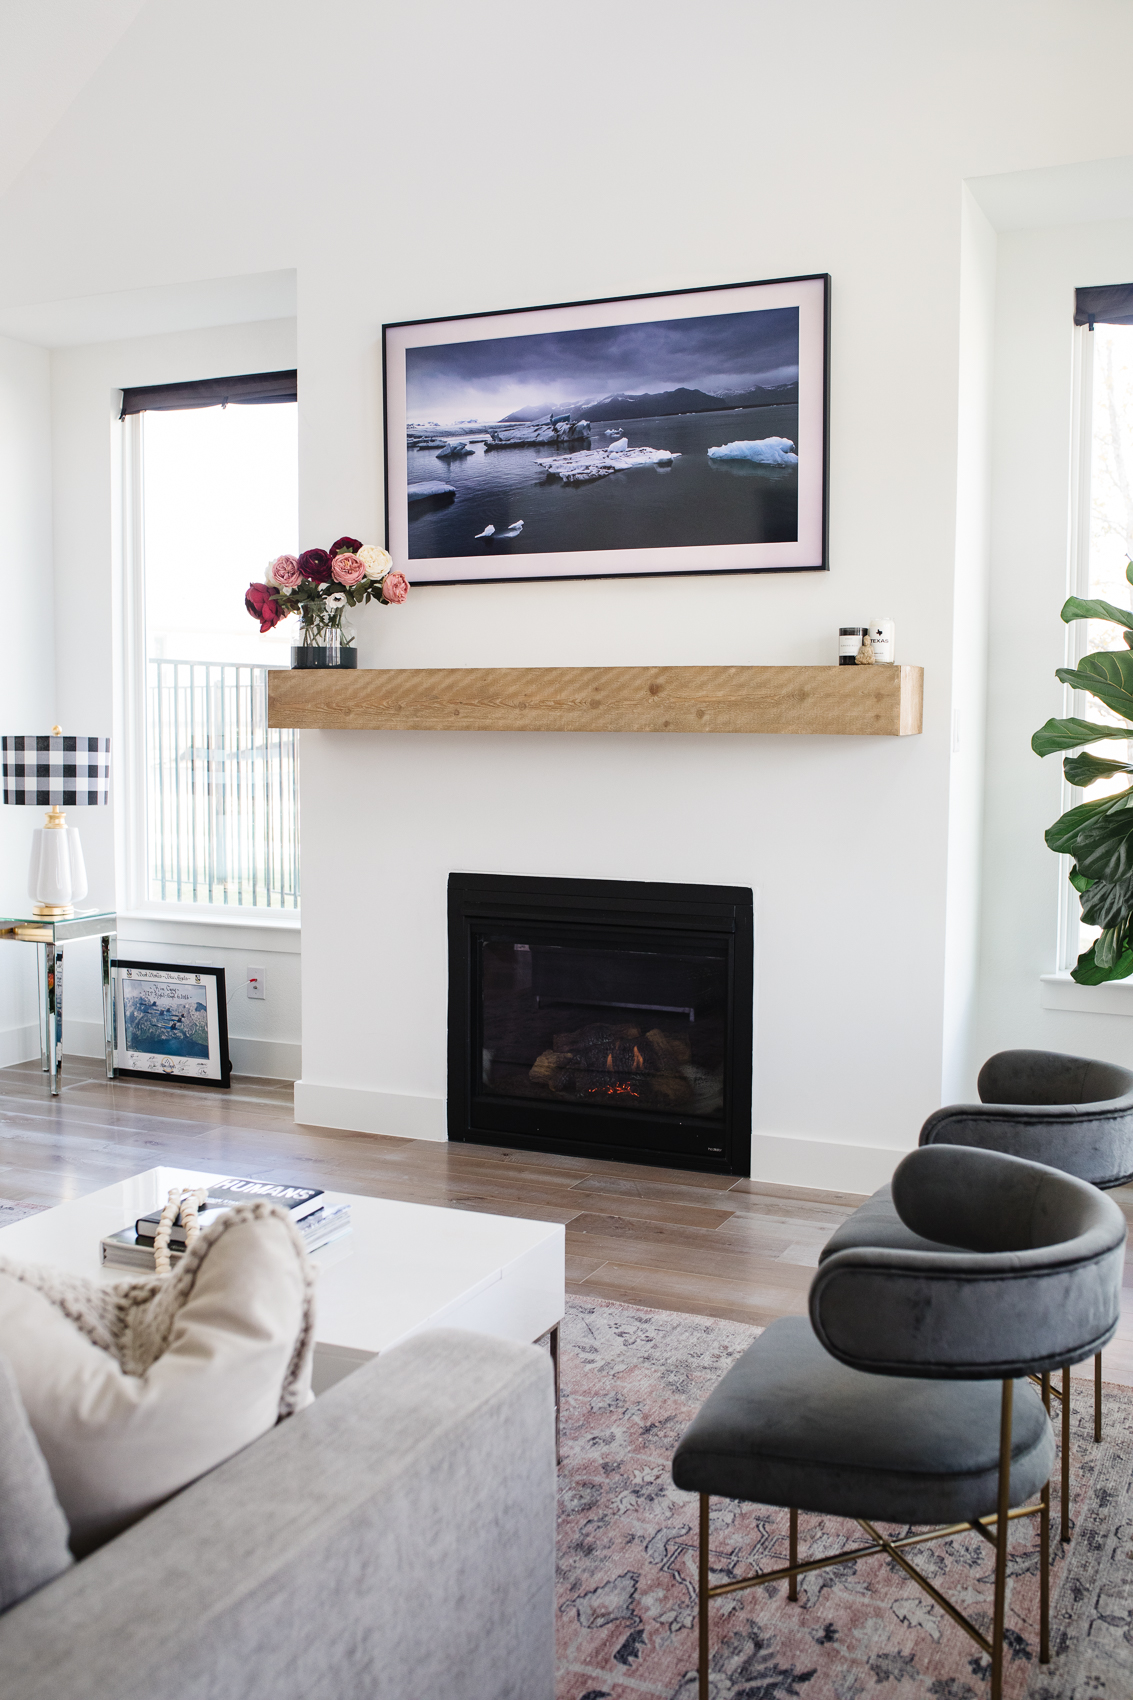 Blogger Hoang-Kim Cung shares her Samsung Frame TV review from her transitional living room in Dallas, Texas